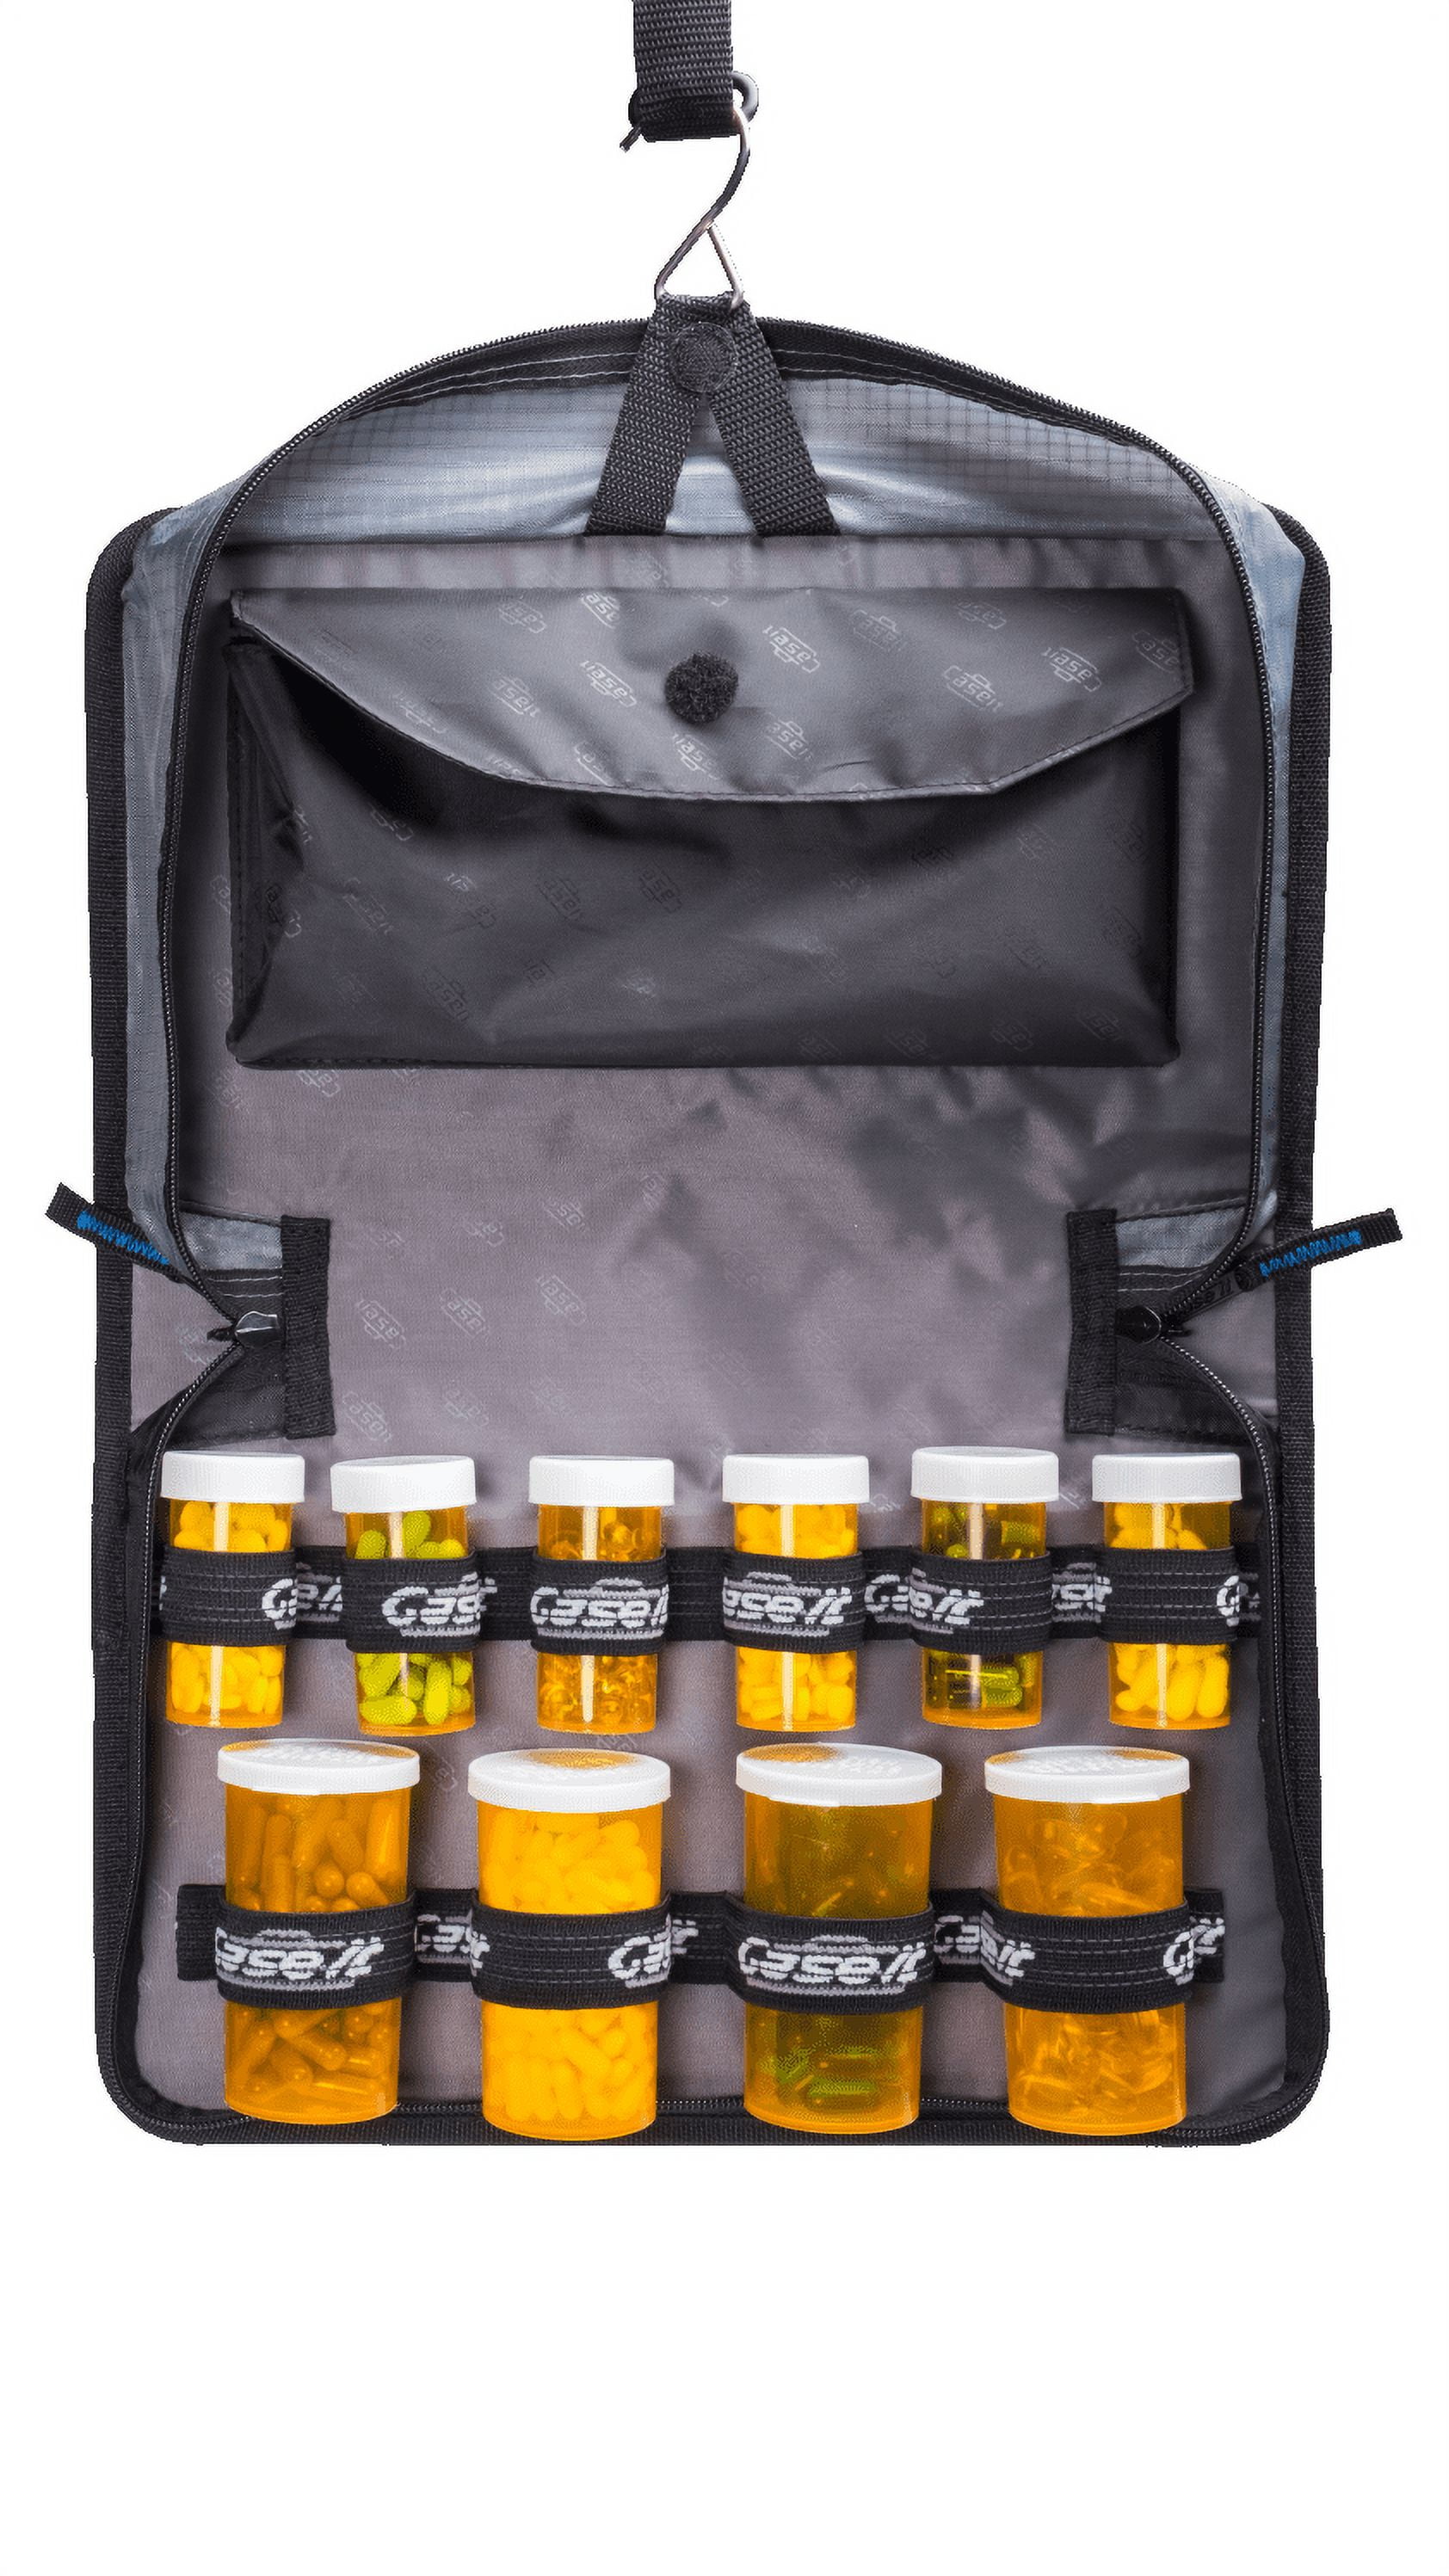 Med Manager XL Medicine Organizer and Pill Case, Holds (25) Pill Bottles -  (17) Standard Size and (8) Large Bottles, Red, 13 inches x 13 inches x 4.5  inches 